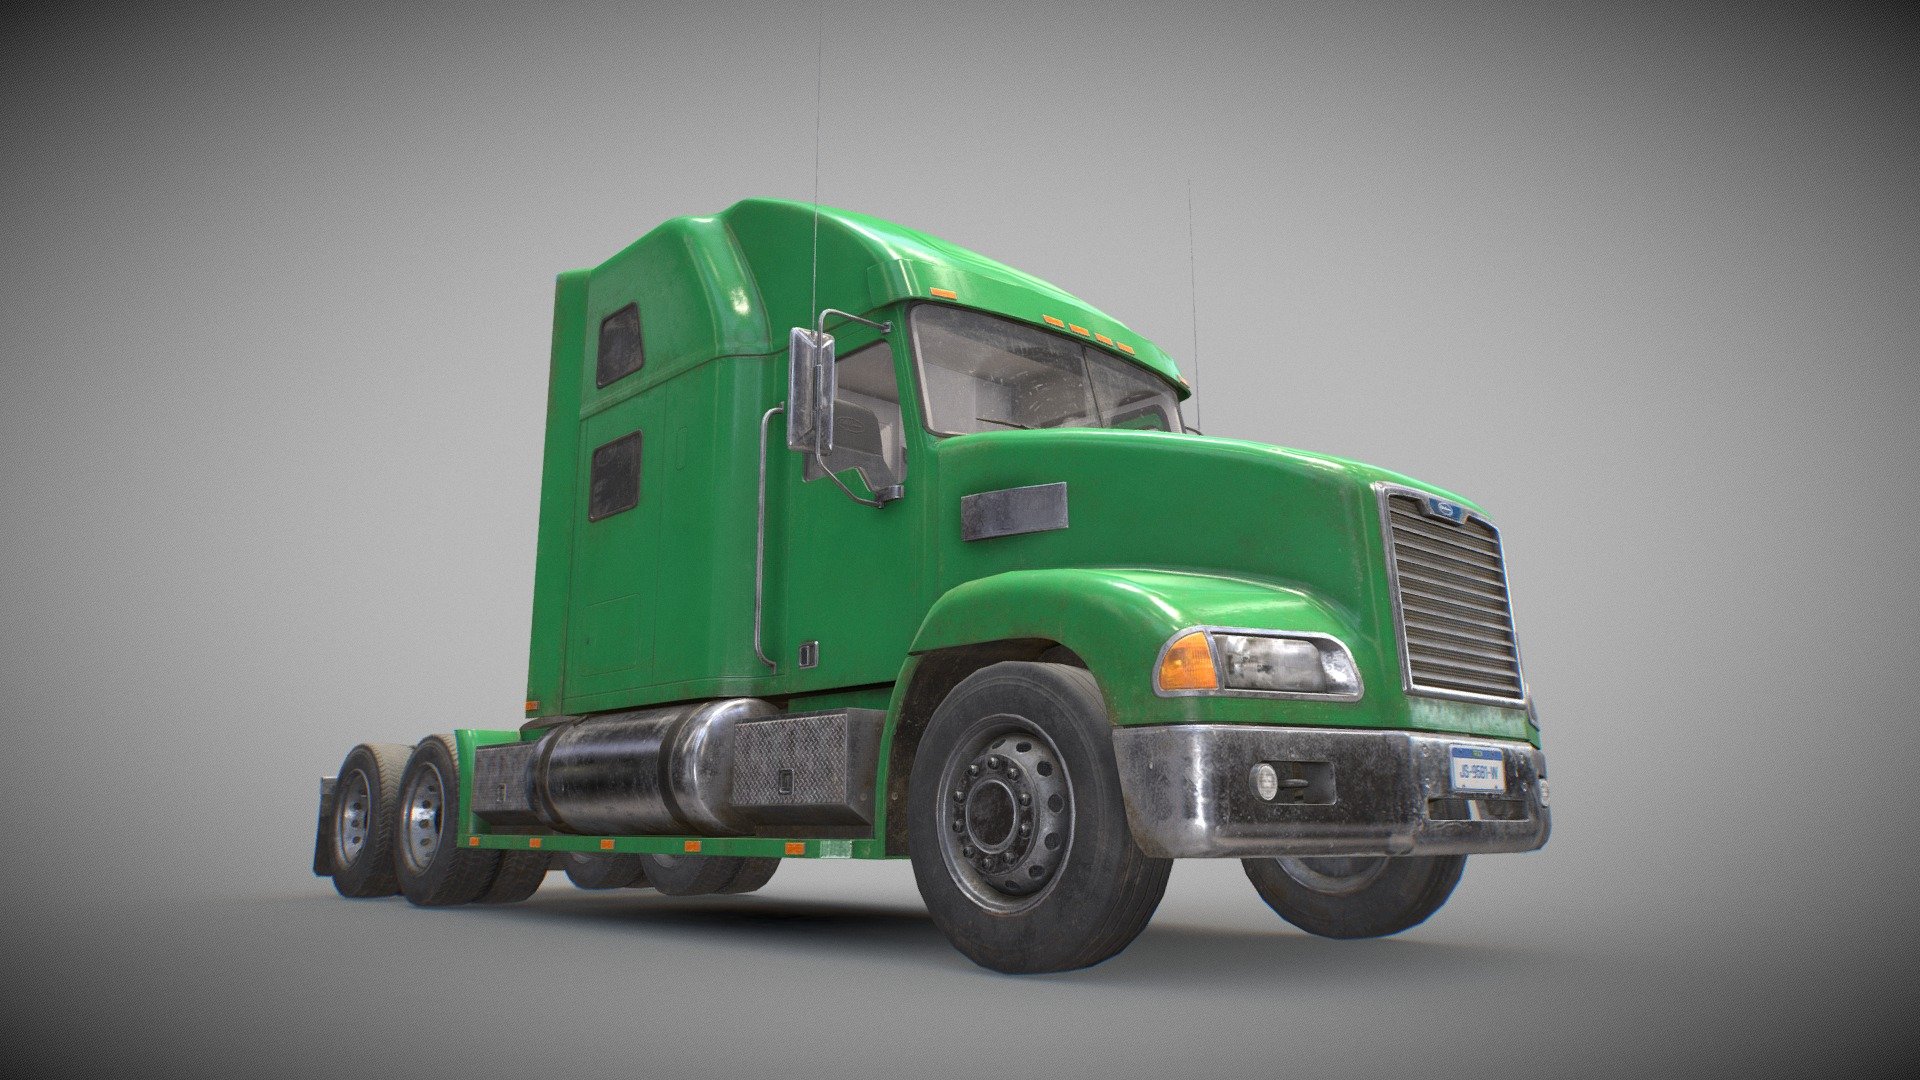 Low Poly 3D model of a Green Semi Truck Tractor with sleeper cab:

The model is low poly (36.071 Tris), gameready and has cabin doors and wheels ready to rig/animate (not animated):




Real-world scale and centered.

The unit of measurement used for the model is centimeters

Polys: 18.562 (Converted to triangles: 36.071)

Cabin interior fully modeled and textured.

All Doors, wheels, and steering wheel can be easily rigged/animated.

PBR textures made in Substance Painter

All branding and labels are custom made.

Average texel density:  674 px/m

Second uv channel included for lightmaps.

Packed ORM tectures included for Unreal.

Maps sizes: 




Body: 4096

Chassis: 4096

Interior: 4096

Wheels: 2048

Windows: 1024

Provided Maps:




Albedo

Normal

Roughness

Metalness

AO

Opacity included in Albedo (windows)

Emissive

Formats Incuded - MAX / BLEND / OBJ / FBX 

This model can be used for any game, film, personal project, etc. You may not resell or redistribute any content - Semi Truck Tractor - Green - Low Poly - Buy Royalty Free 3D model by MSWoodvine 3d model